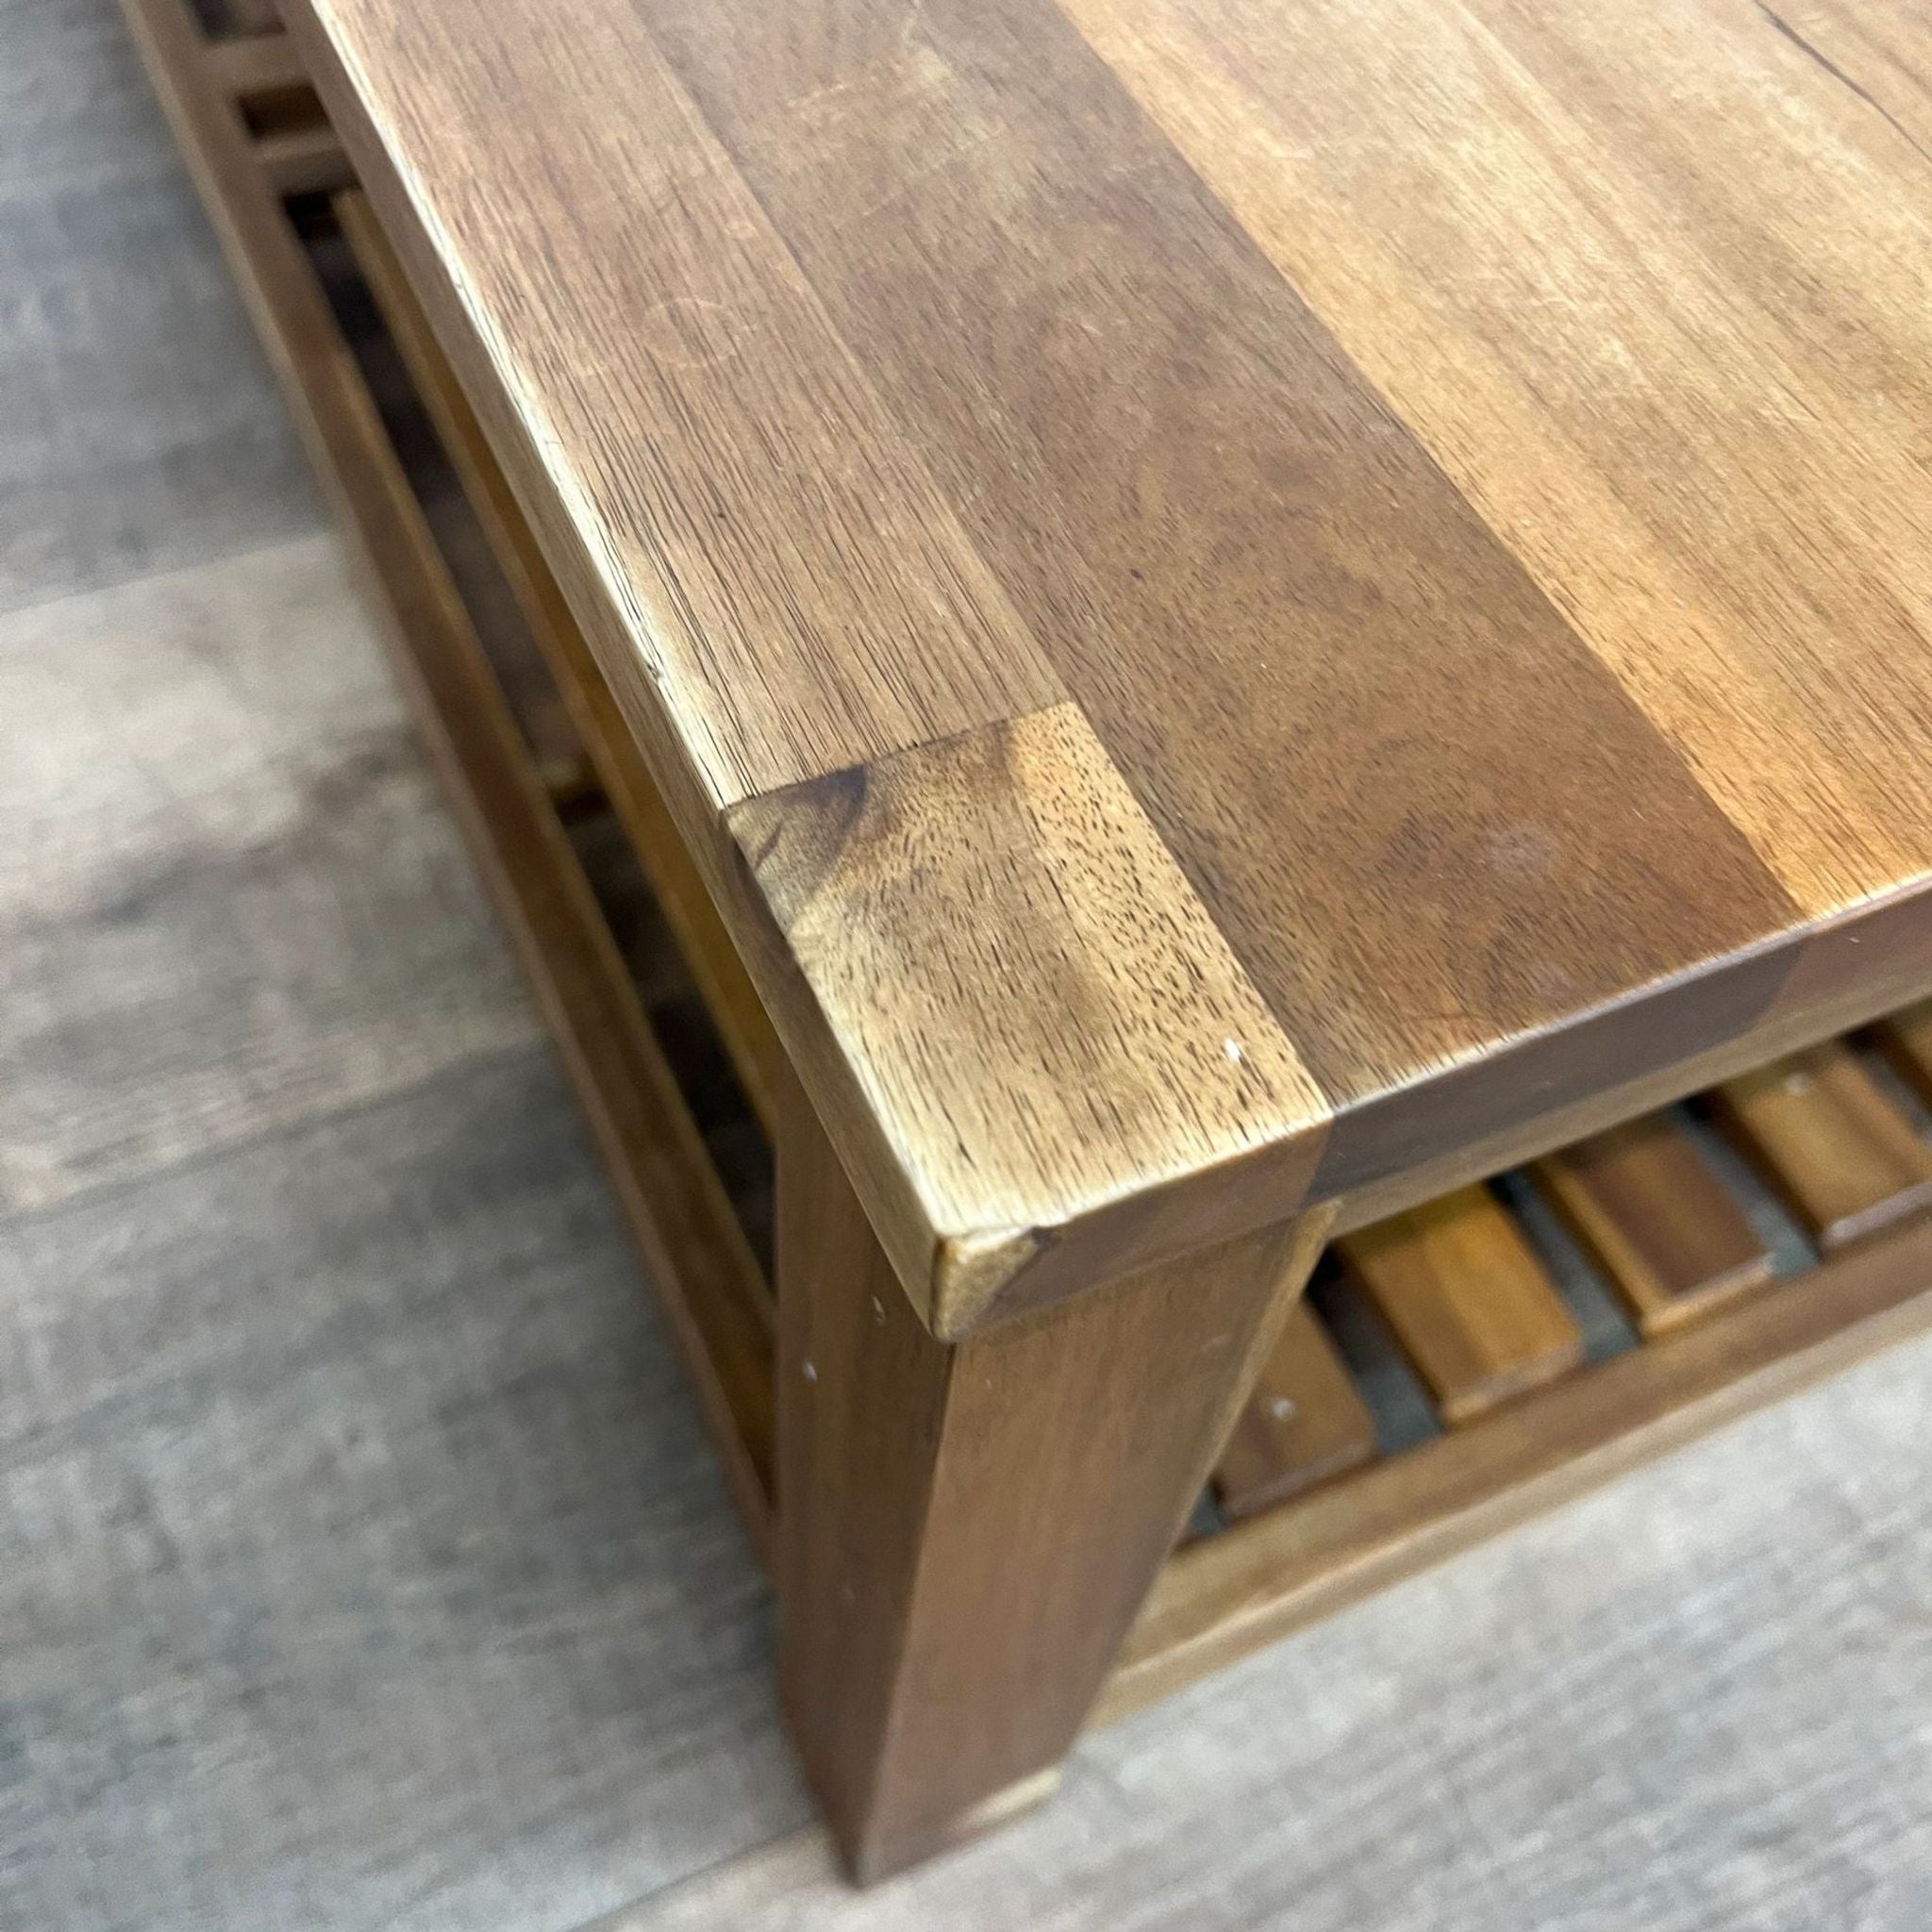 Close-up of Reperch coffee table corner showing striped wood pattern and texture.